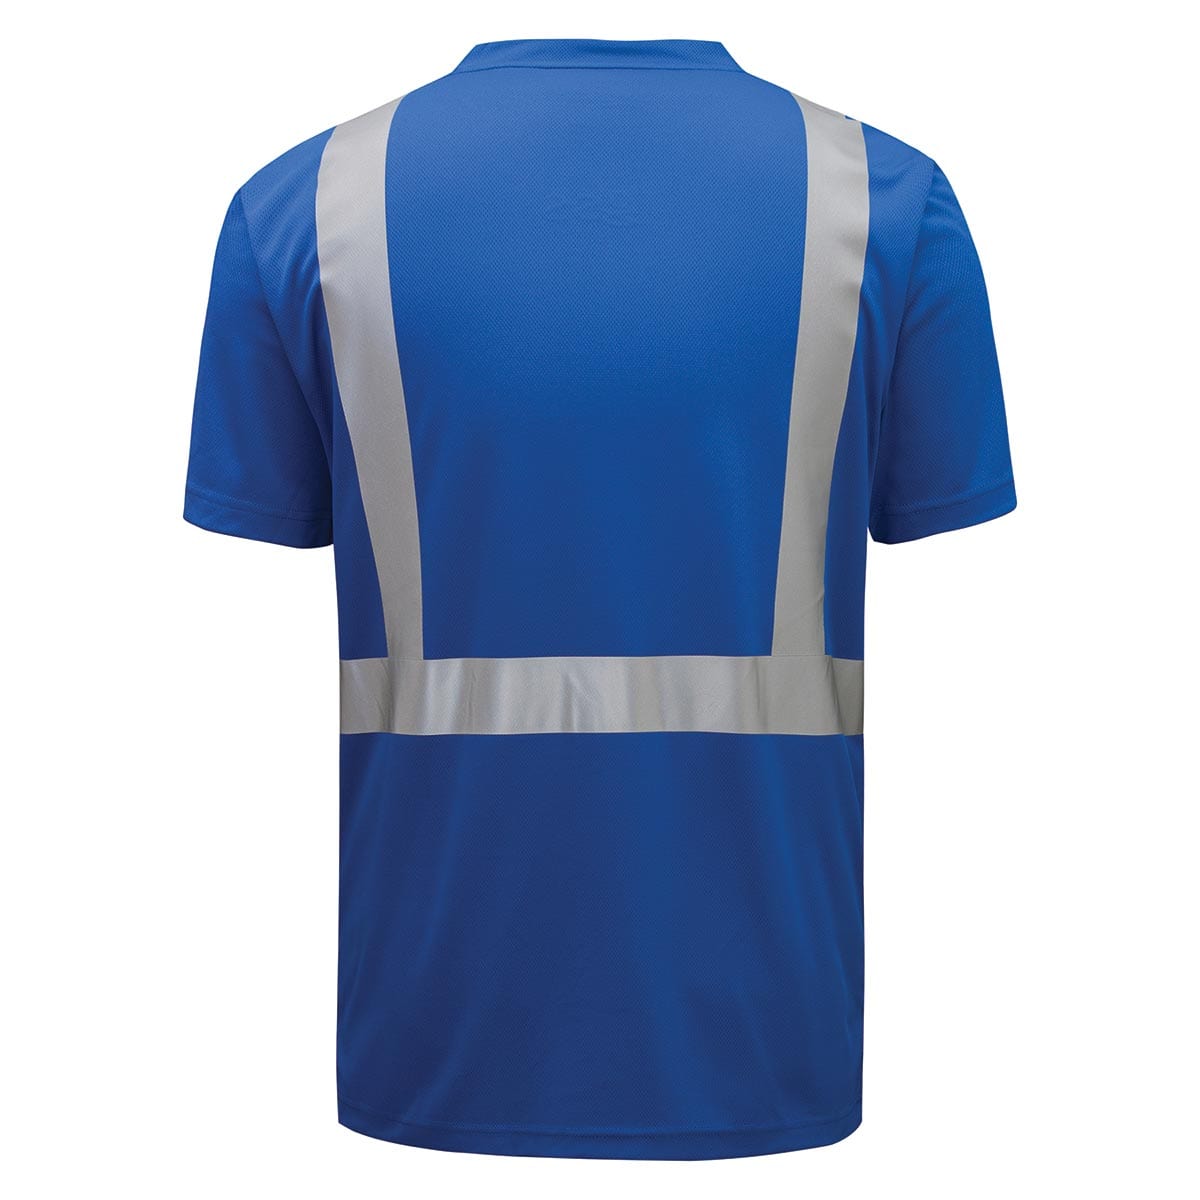 GSS Safety Short Sleeve Enhanced Visibility Shirt, Blue and Red